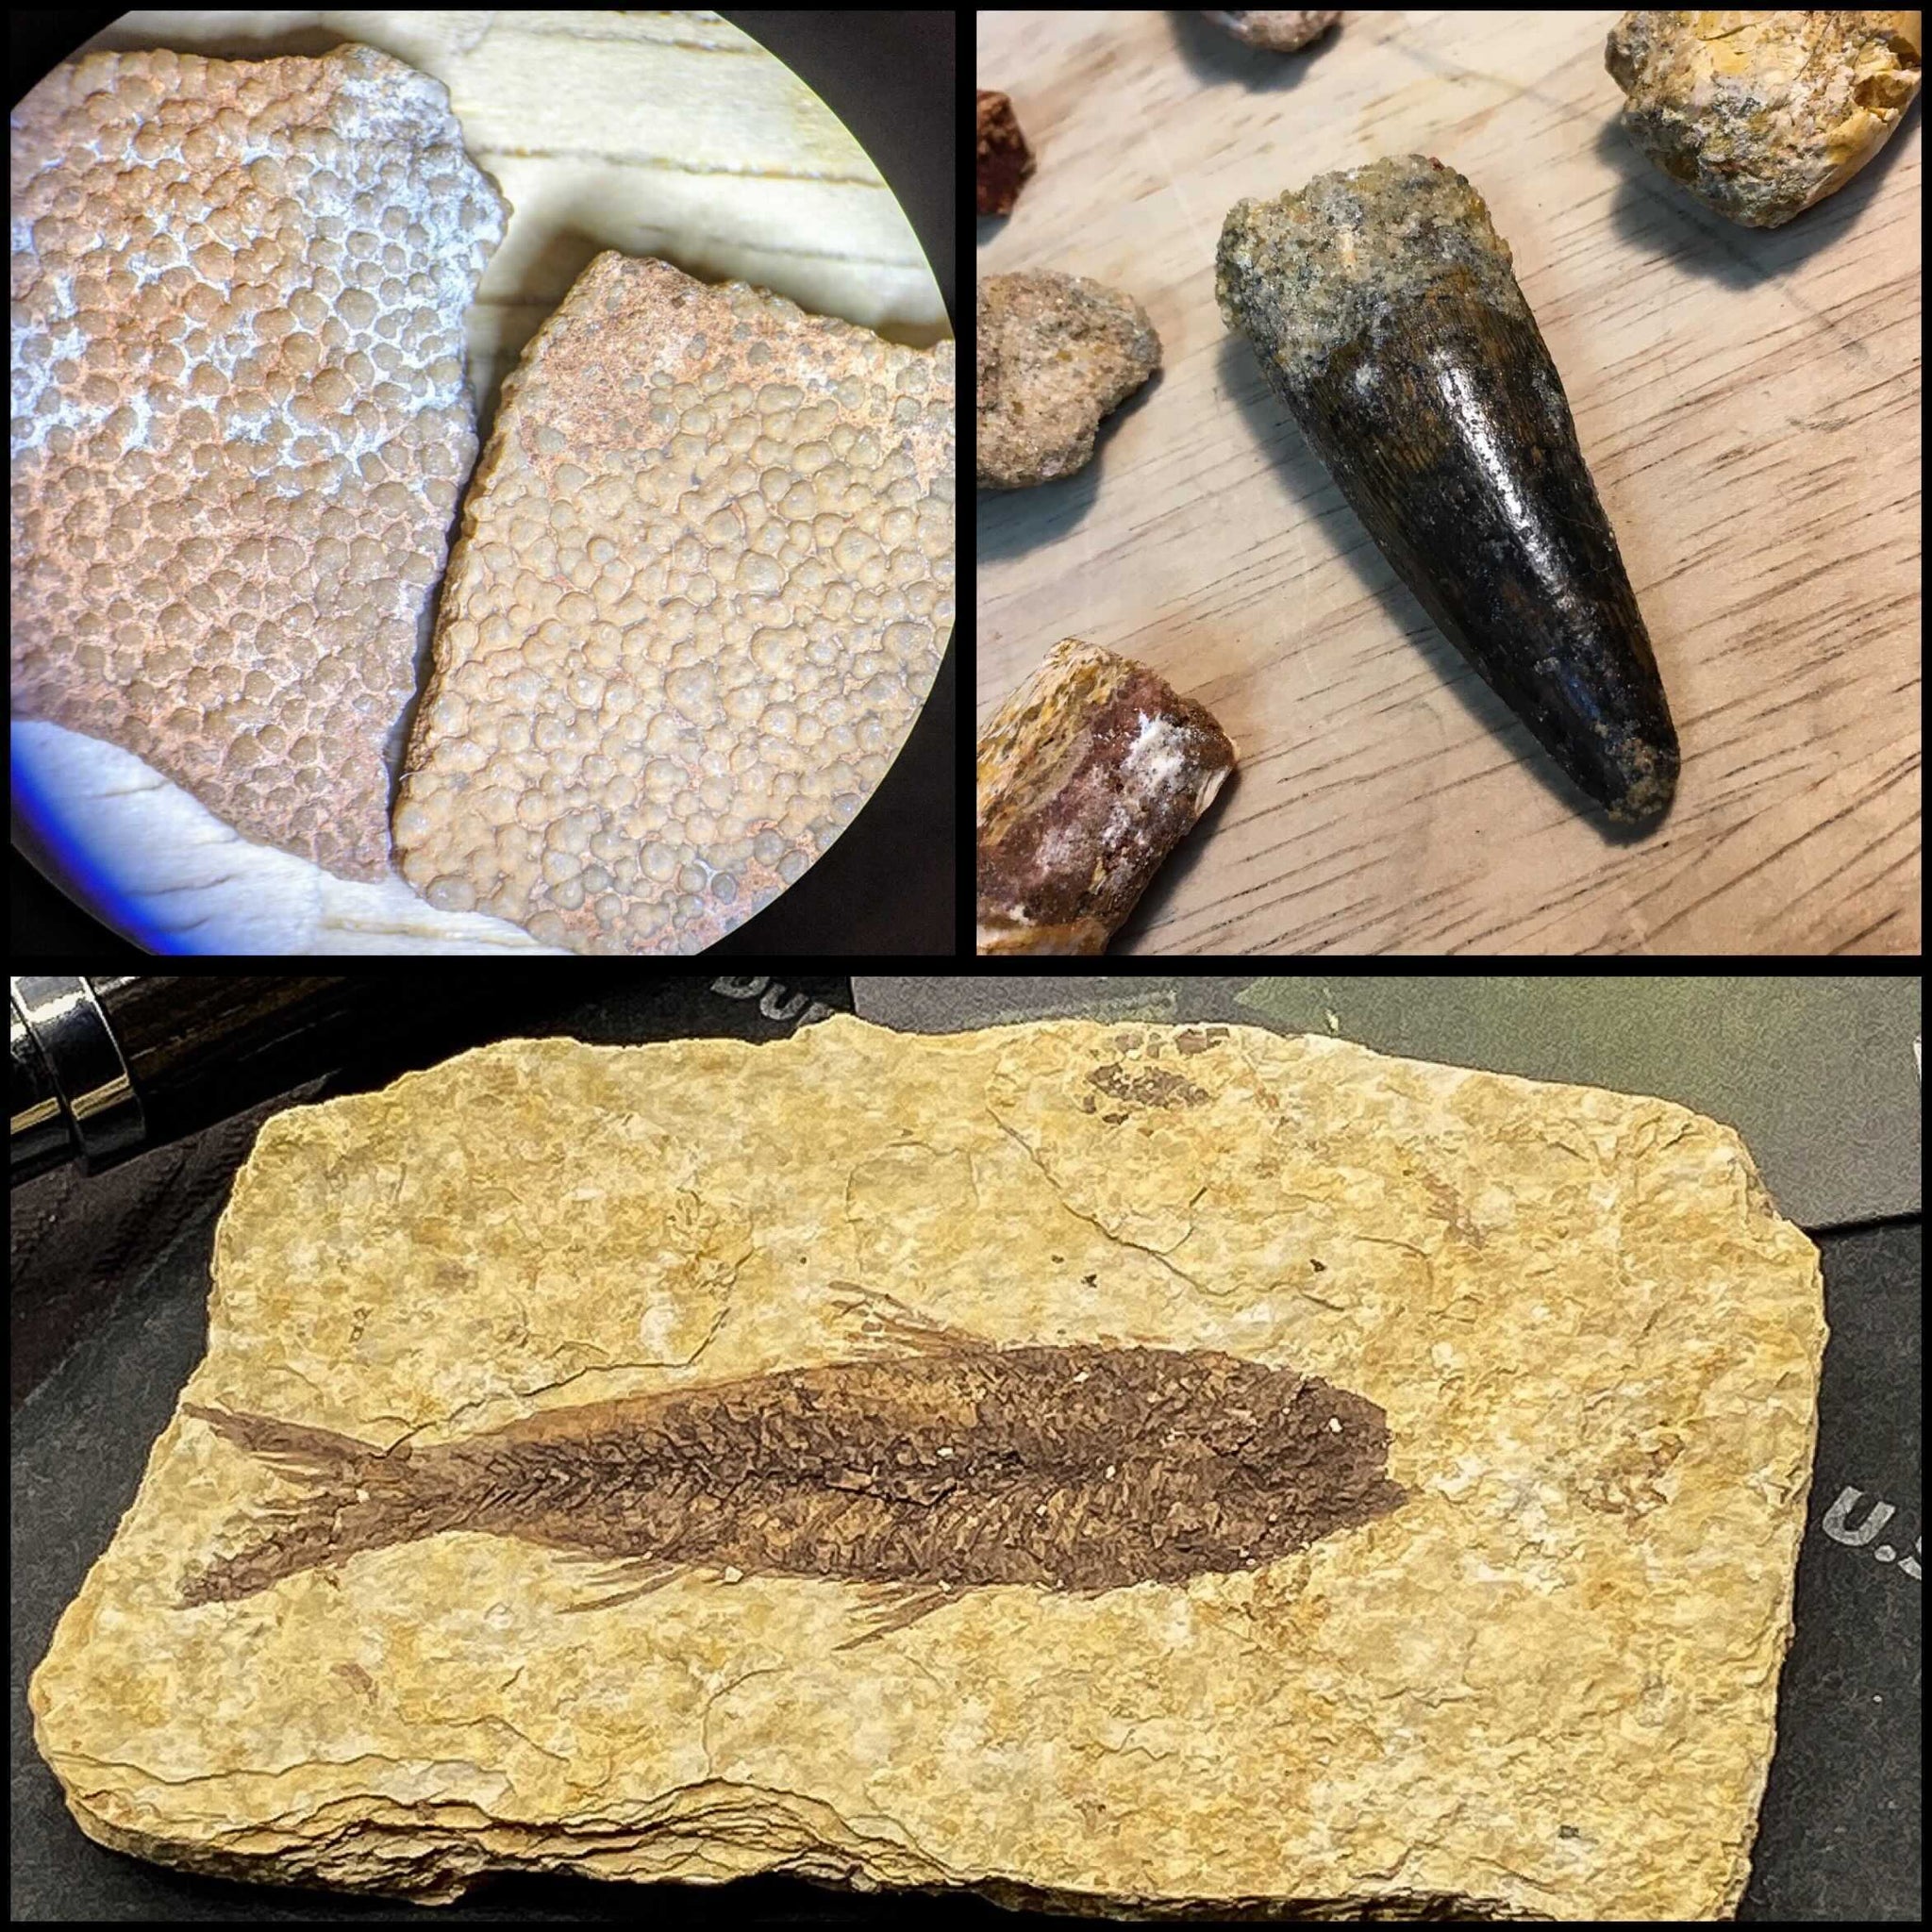 Dinosaur Eggshell, Spinosaurus Tooth, and a Wyoming Fossil Fish!